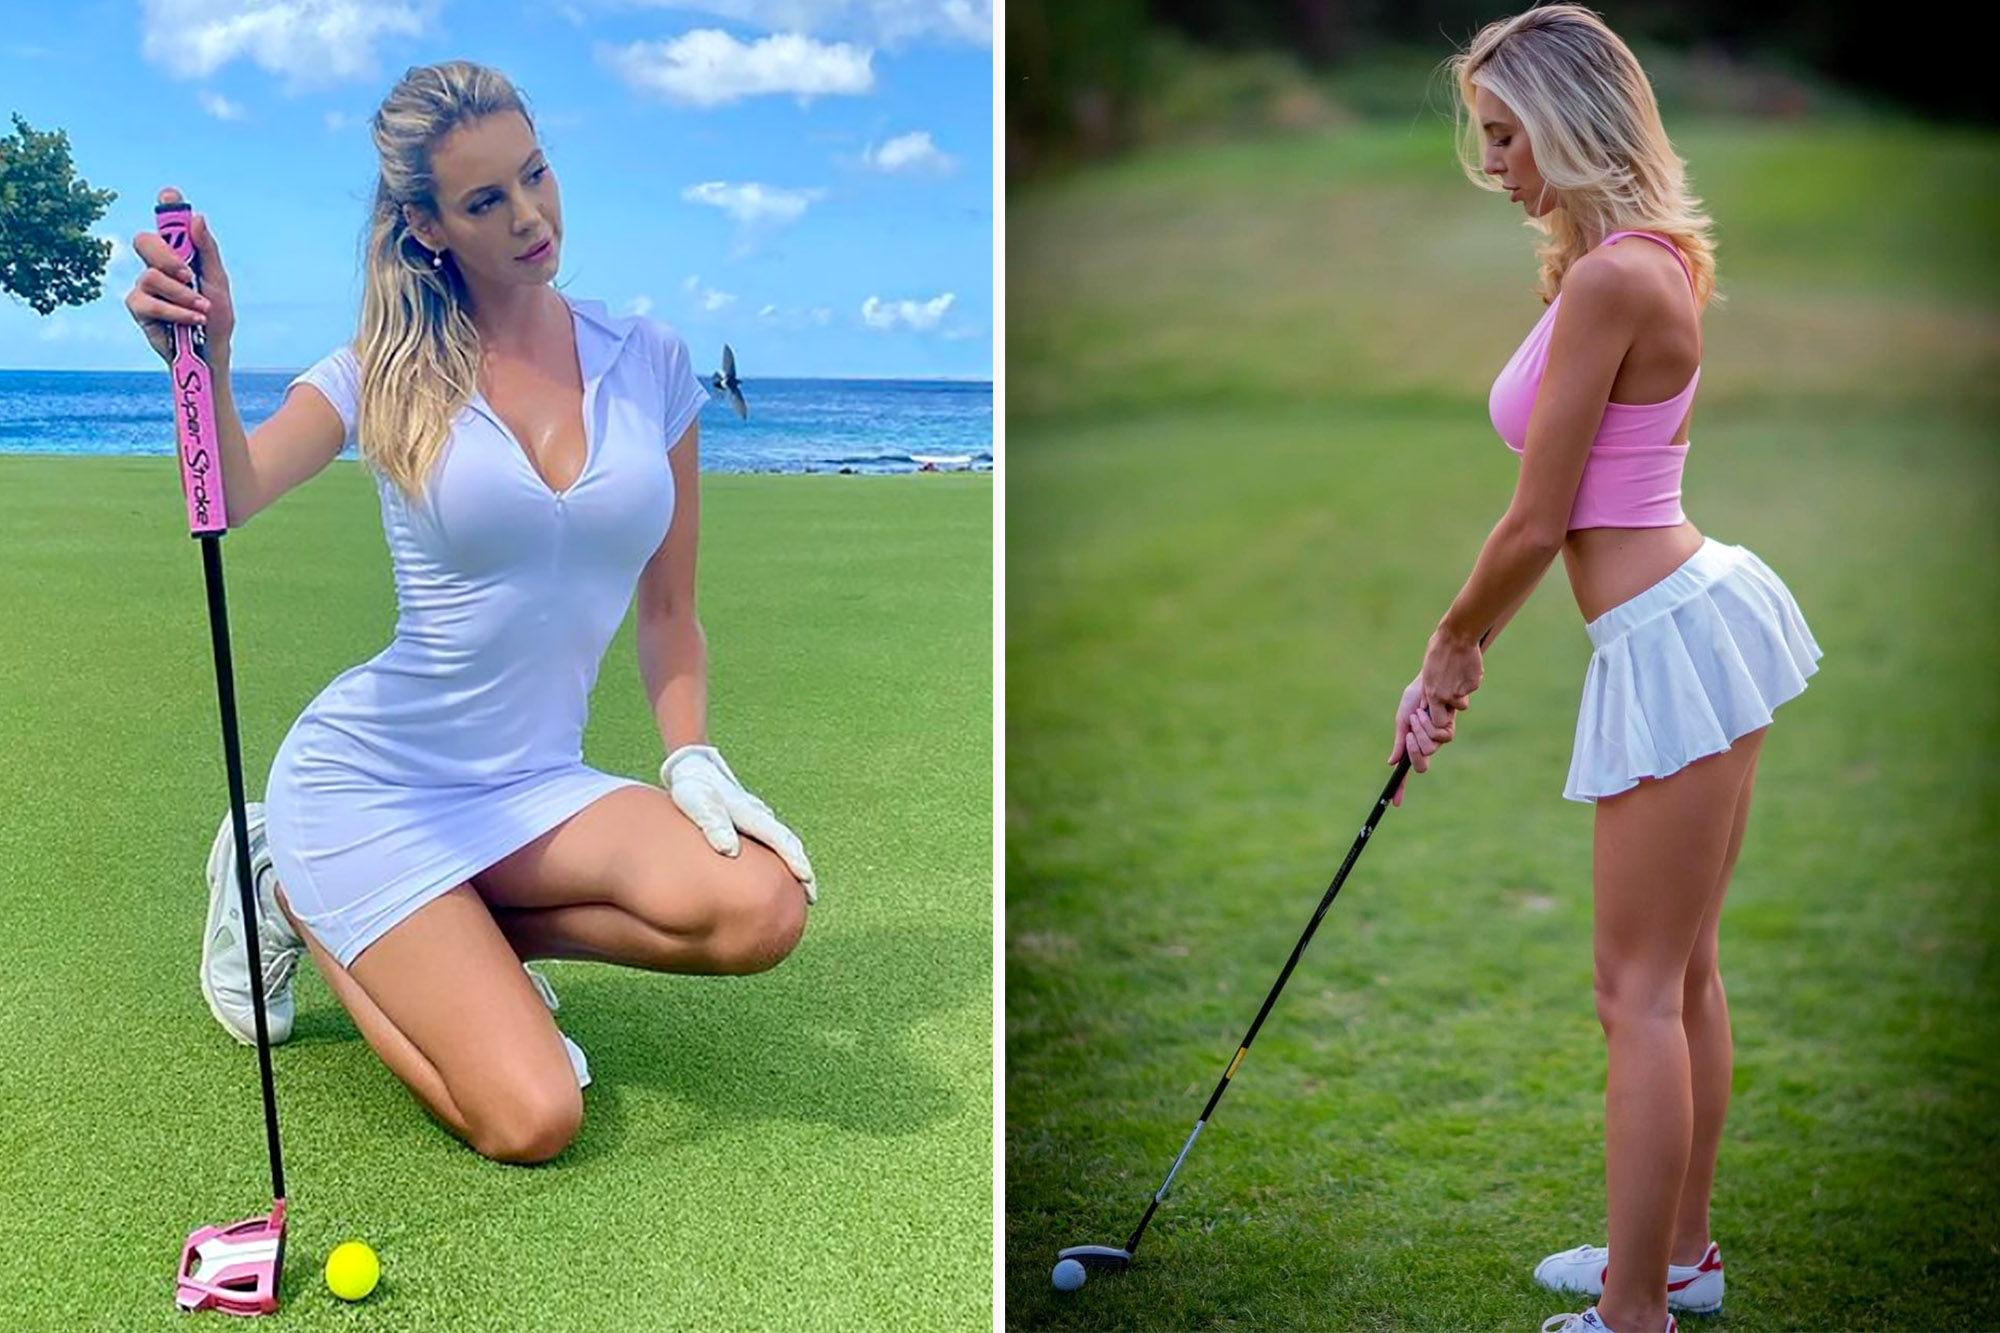 Photo: seaxy golf bets with wife